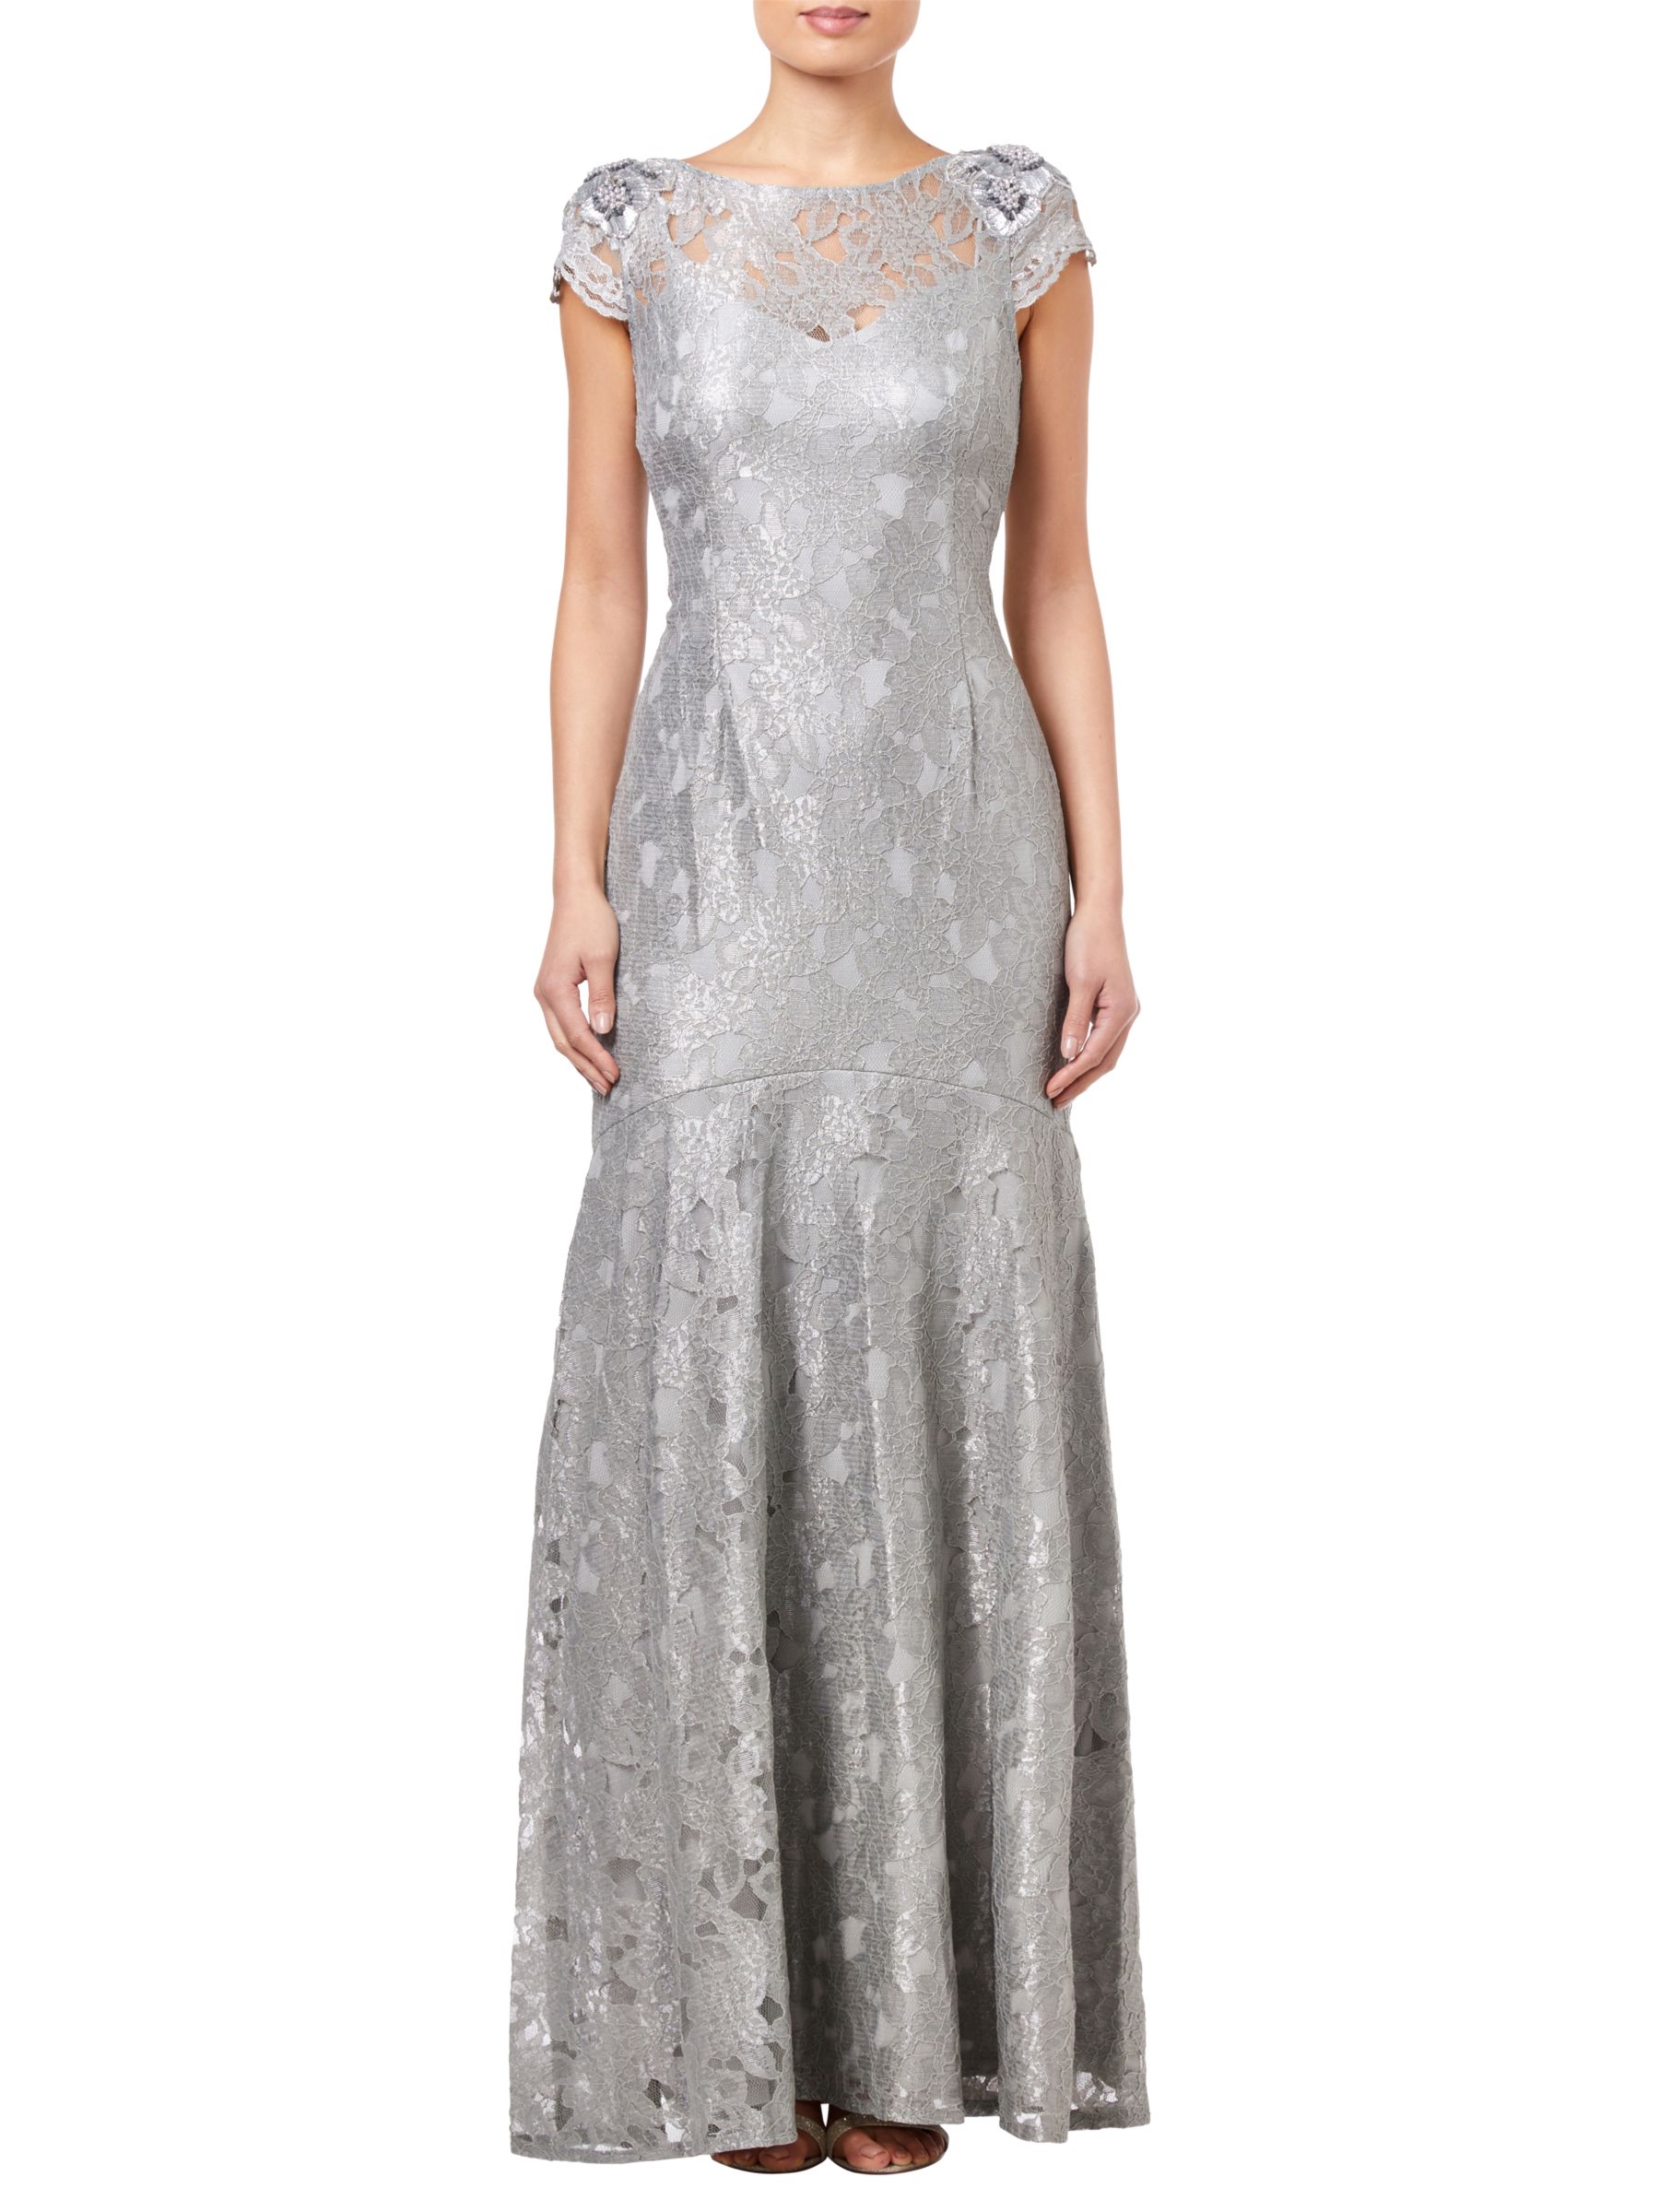 Adrianna Papell Long Metallic Lace Dress, Silver Slate at John Lewis ...